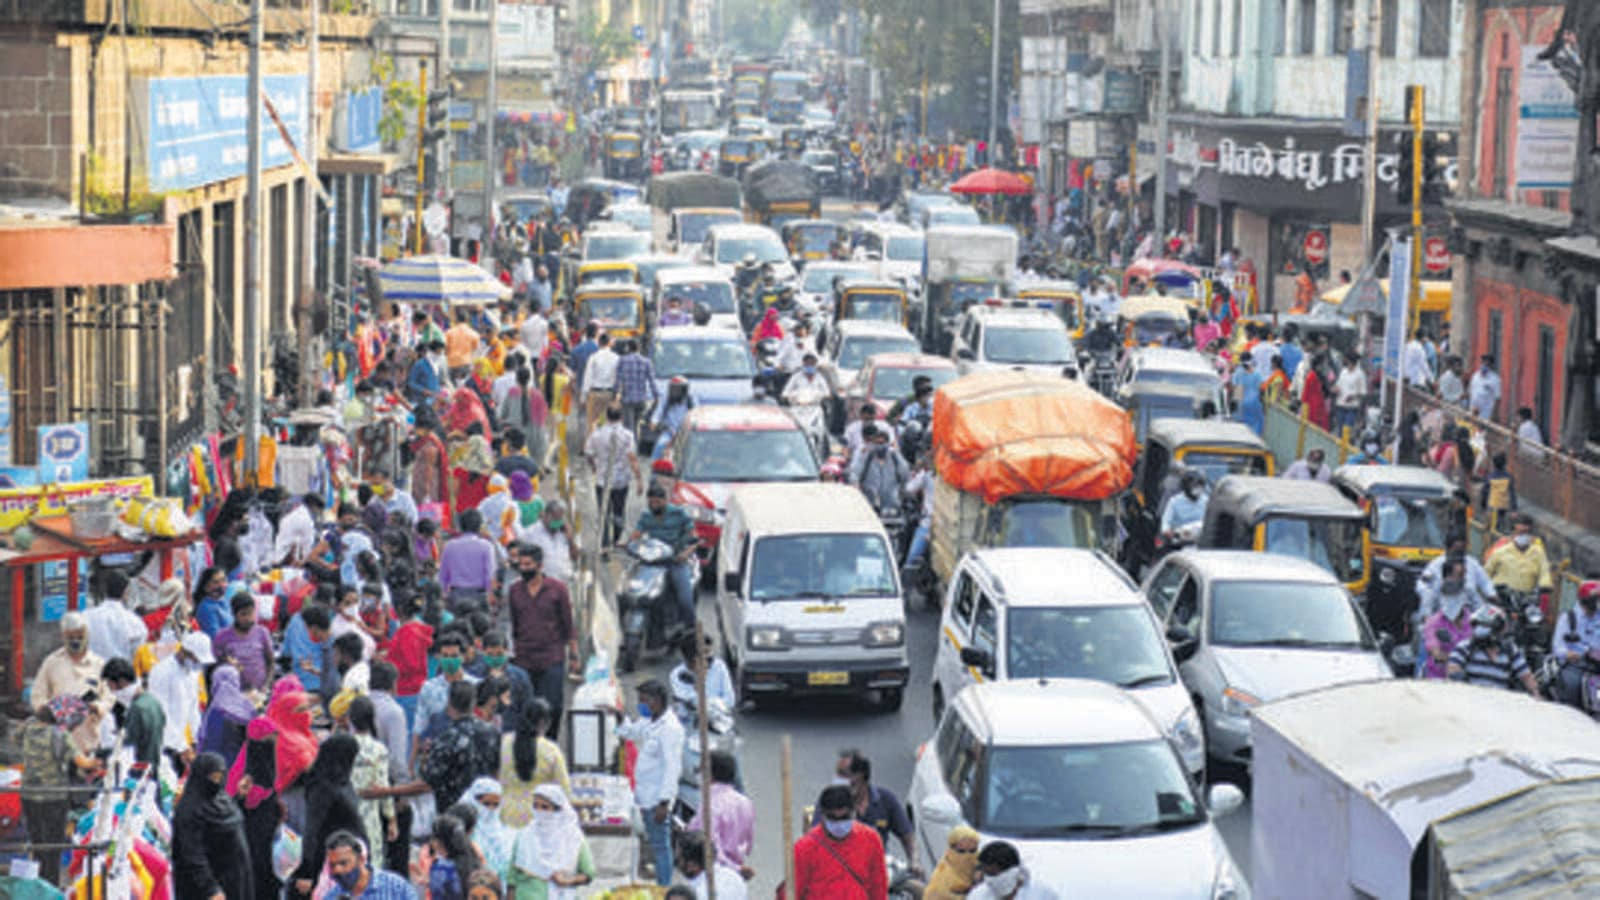 43 lakh vehicles running on Pune roads, almost equal to its population